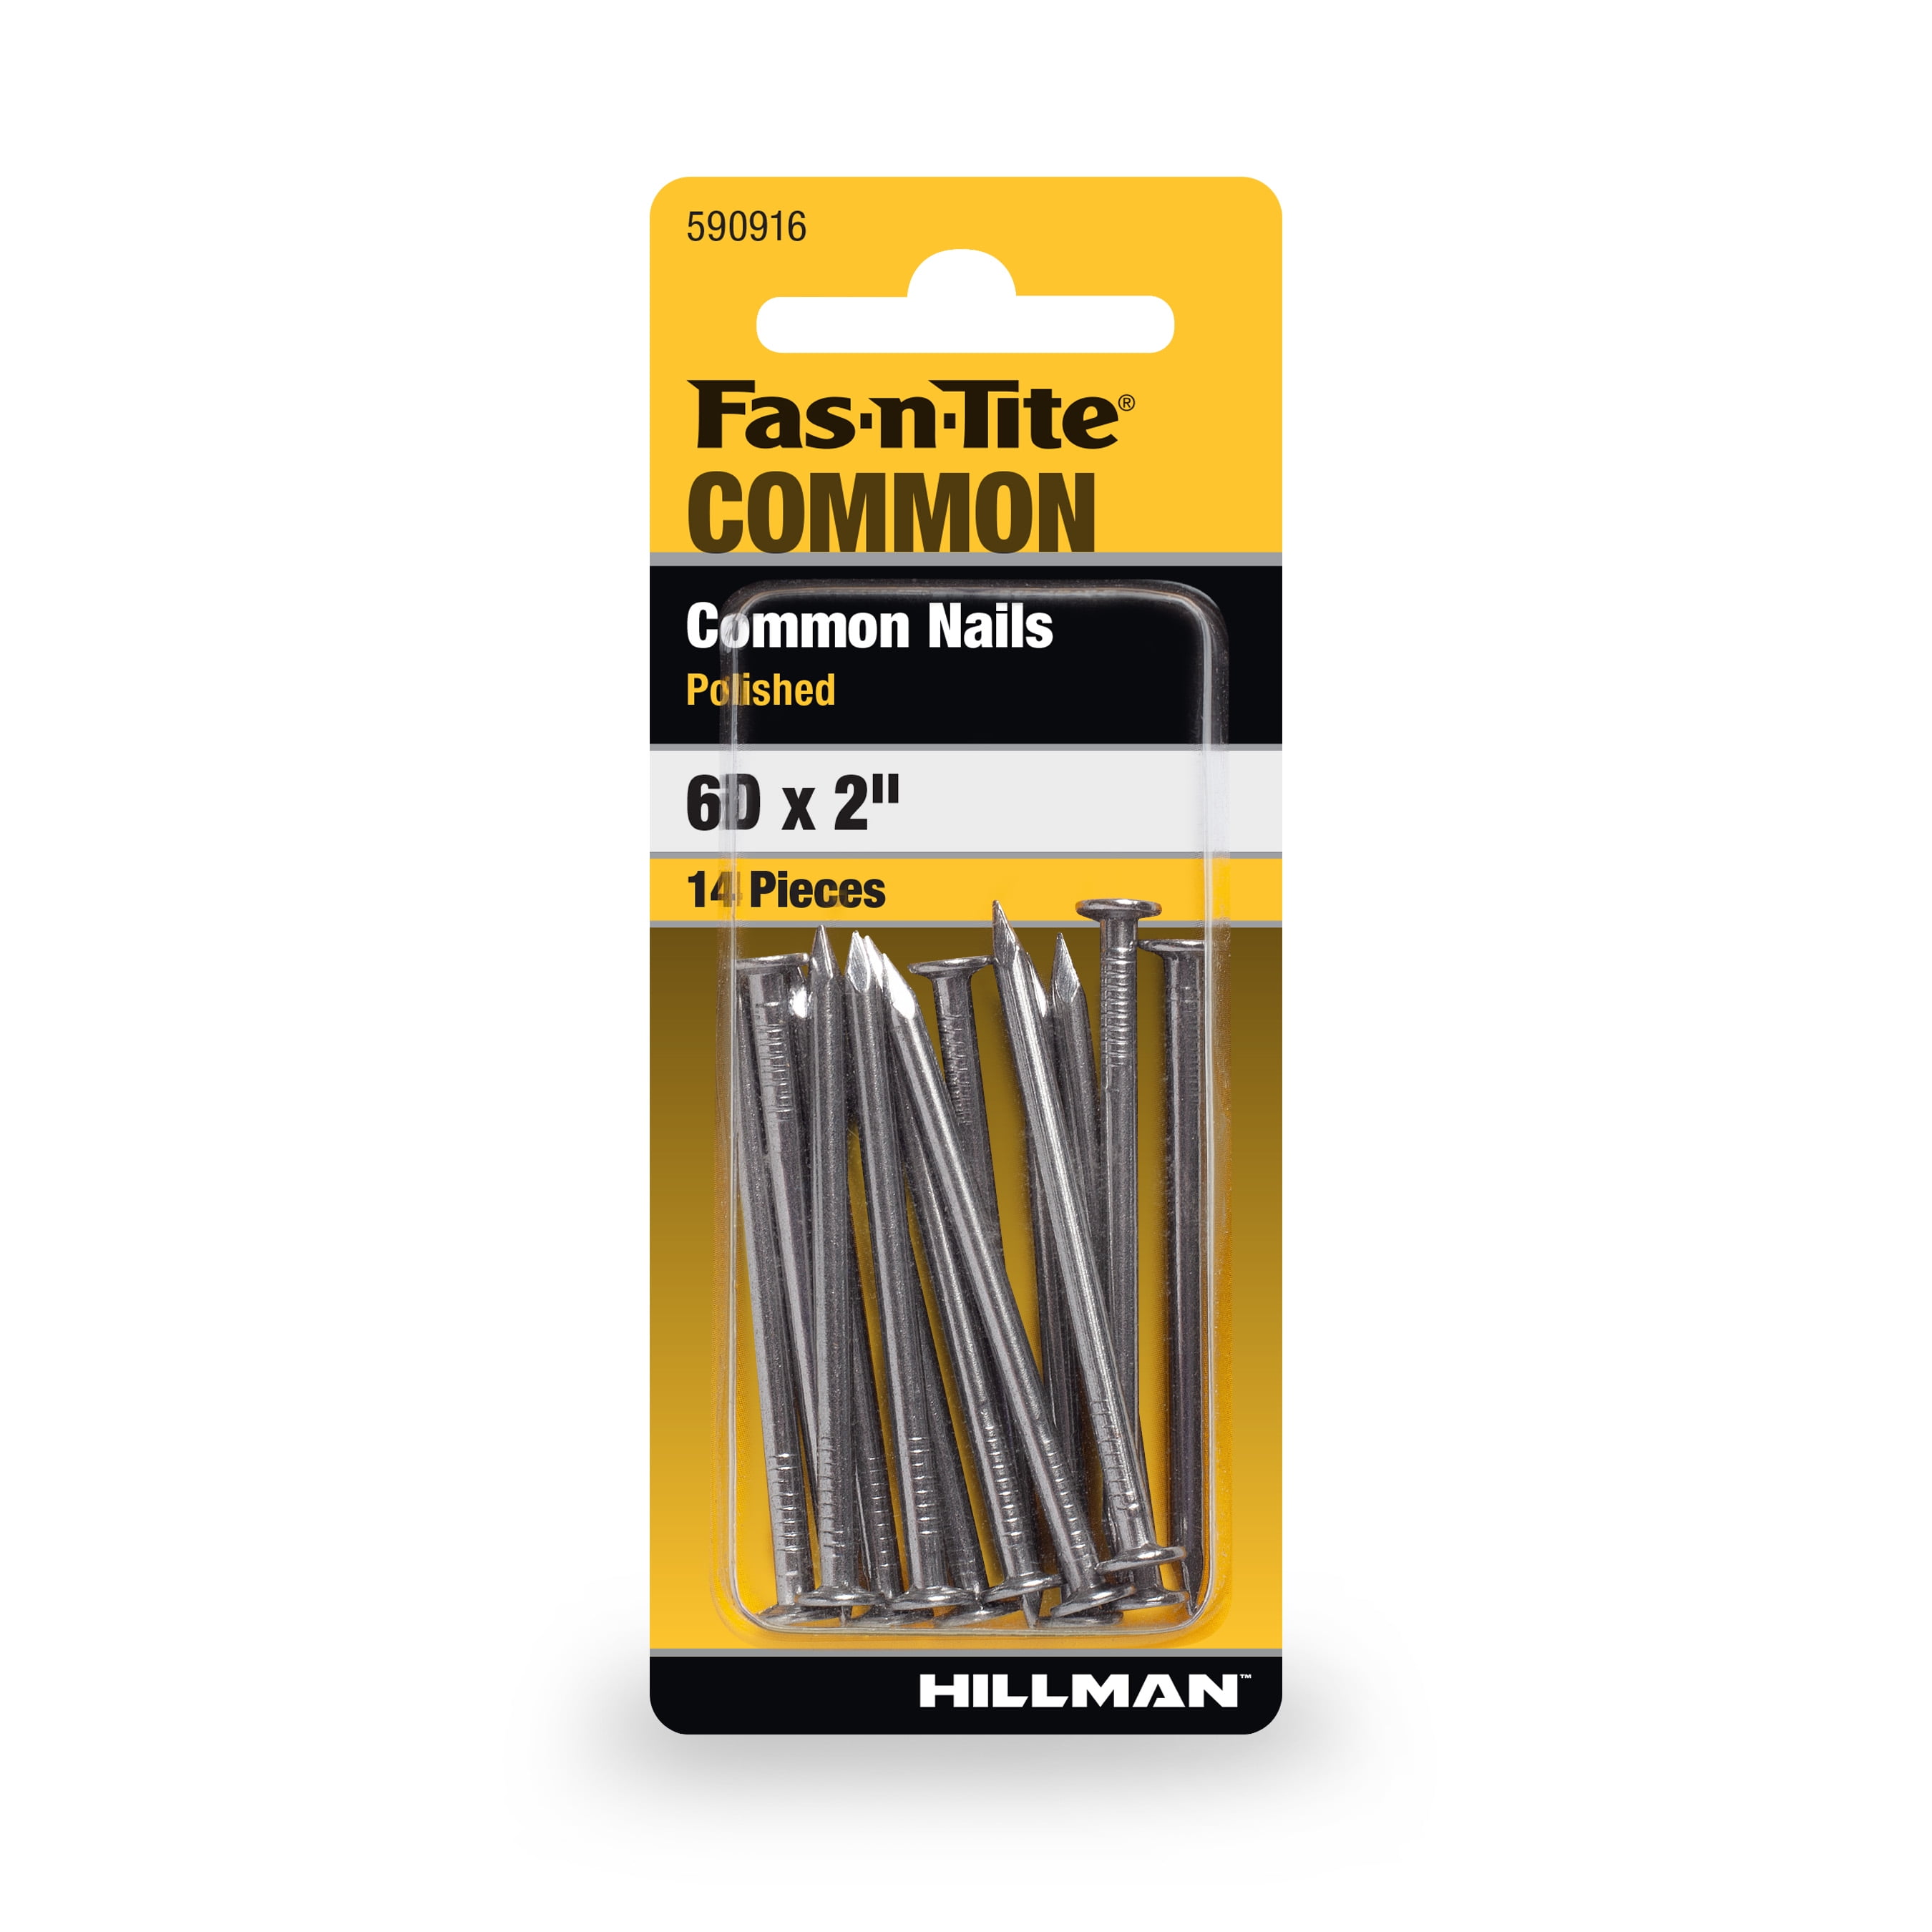 Fas-n-Tite Common Nails, Polished Finish, Steel, 6D x 2", 14 Pieces